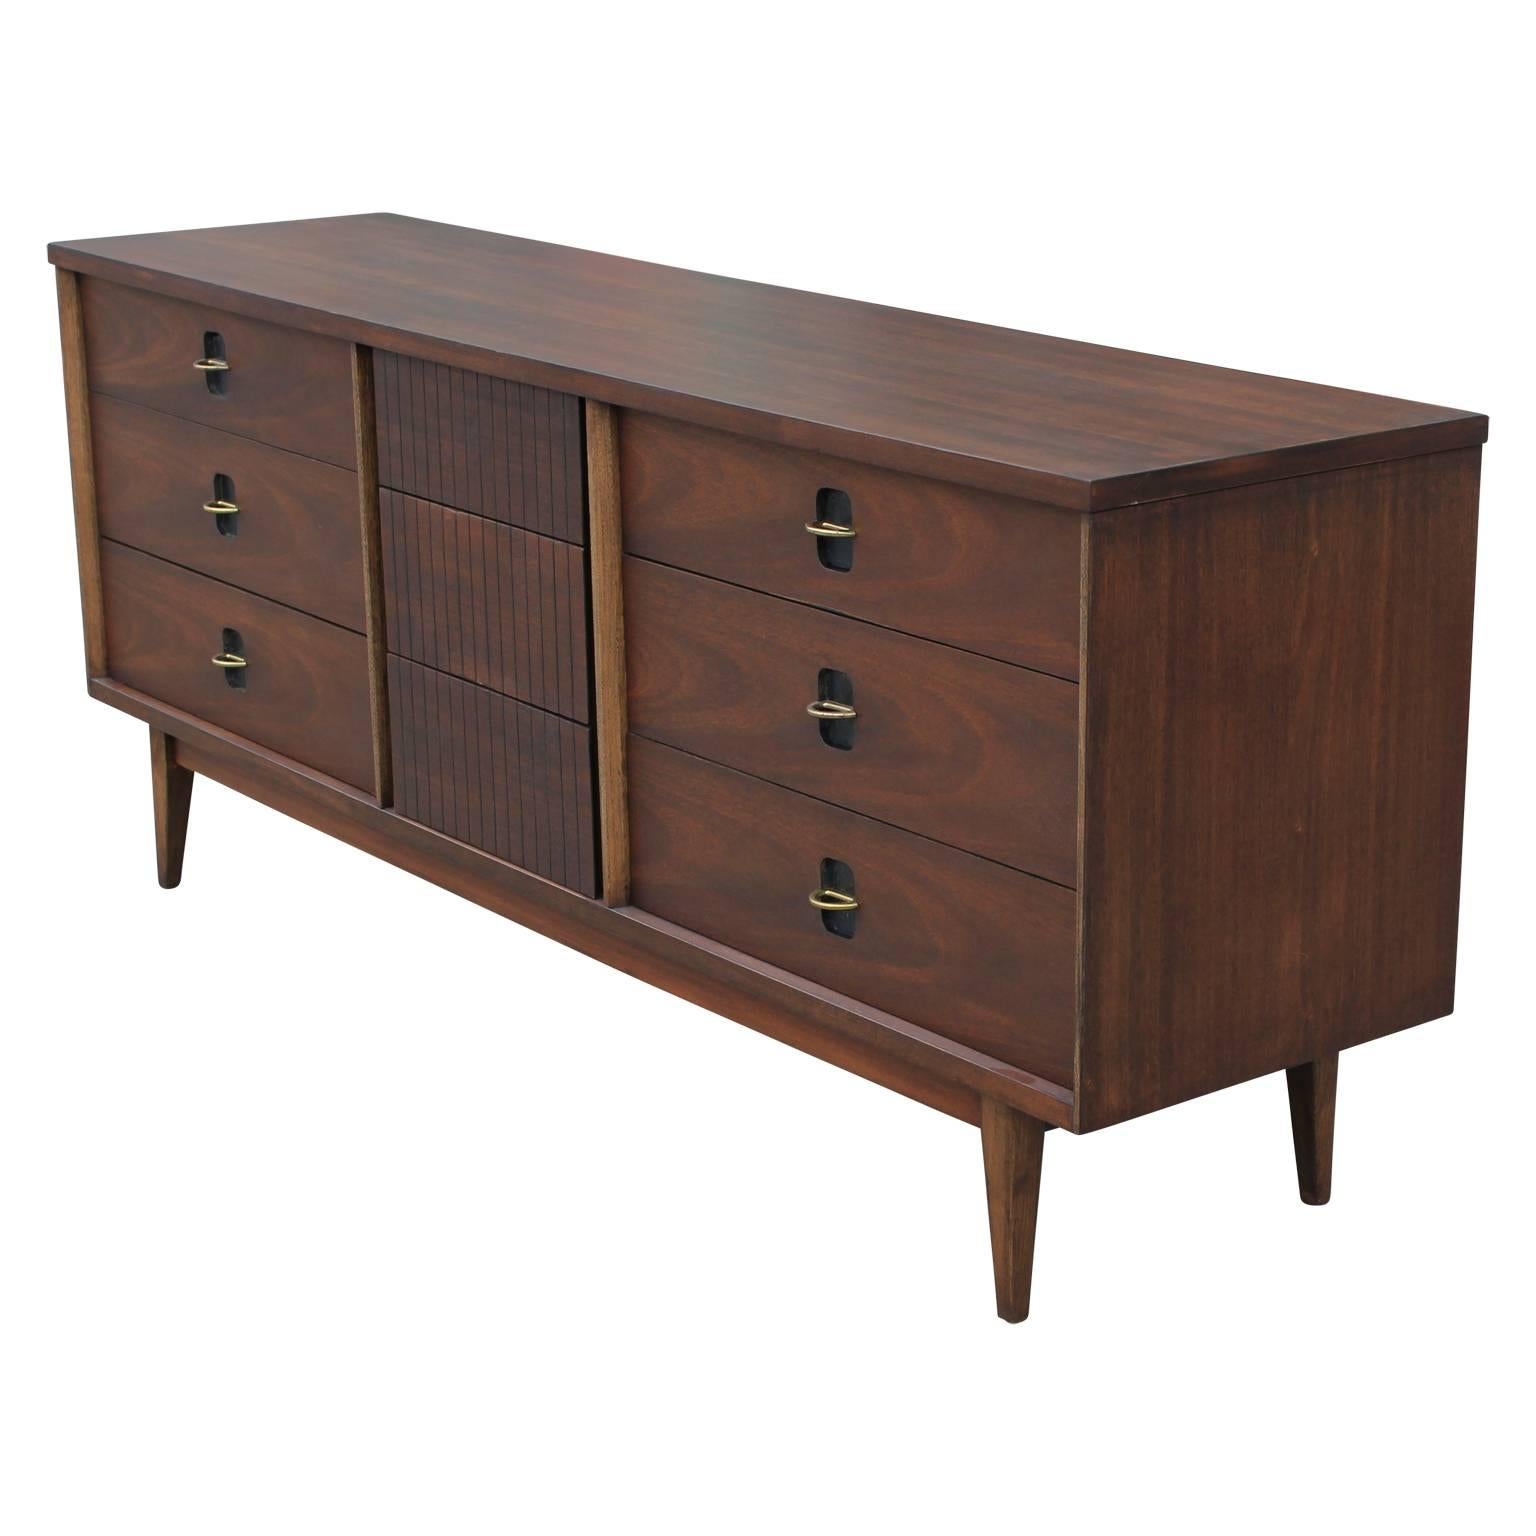 Mid century modern nine drawer dresser made from gorgeous walnut with brass pulls and detailing. In the style of American of Martinsville. The contrast between the brown, black and brass creates a lovely interest. 